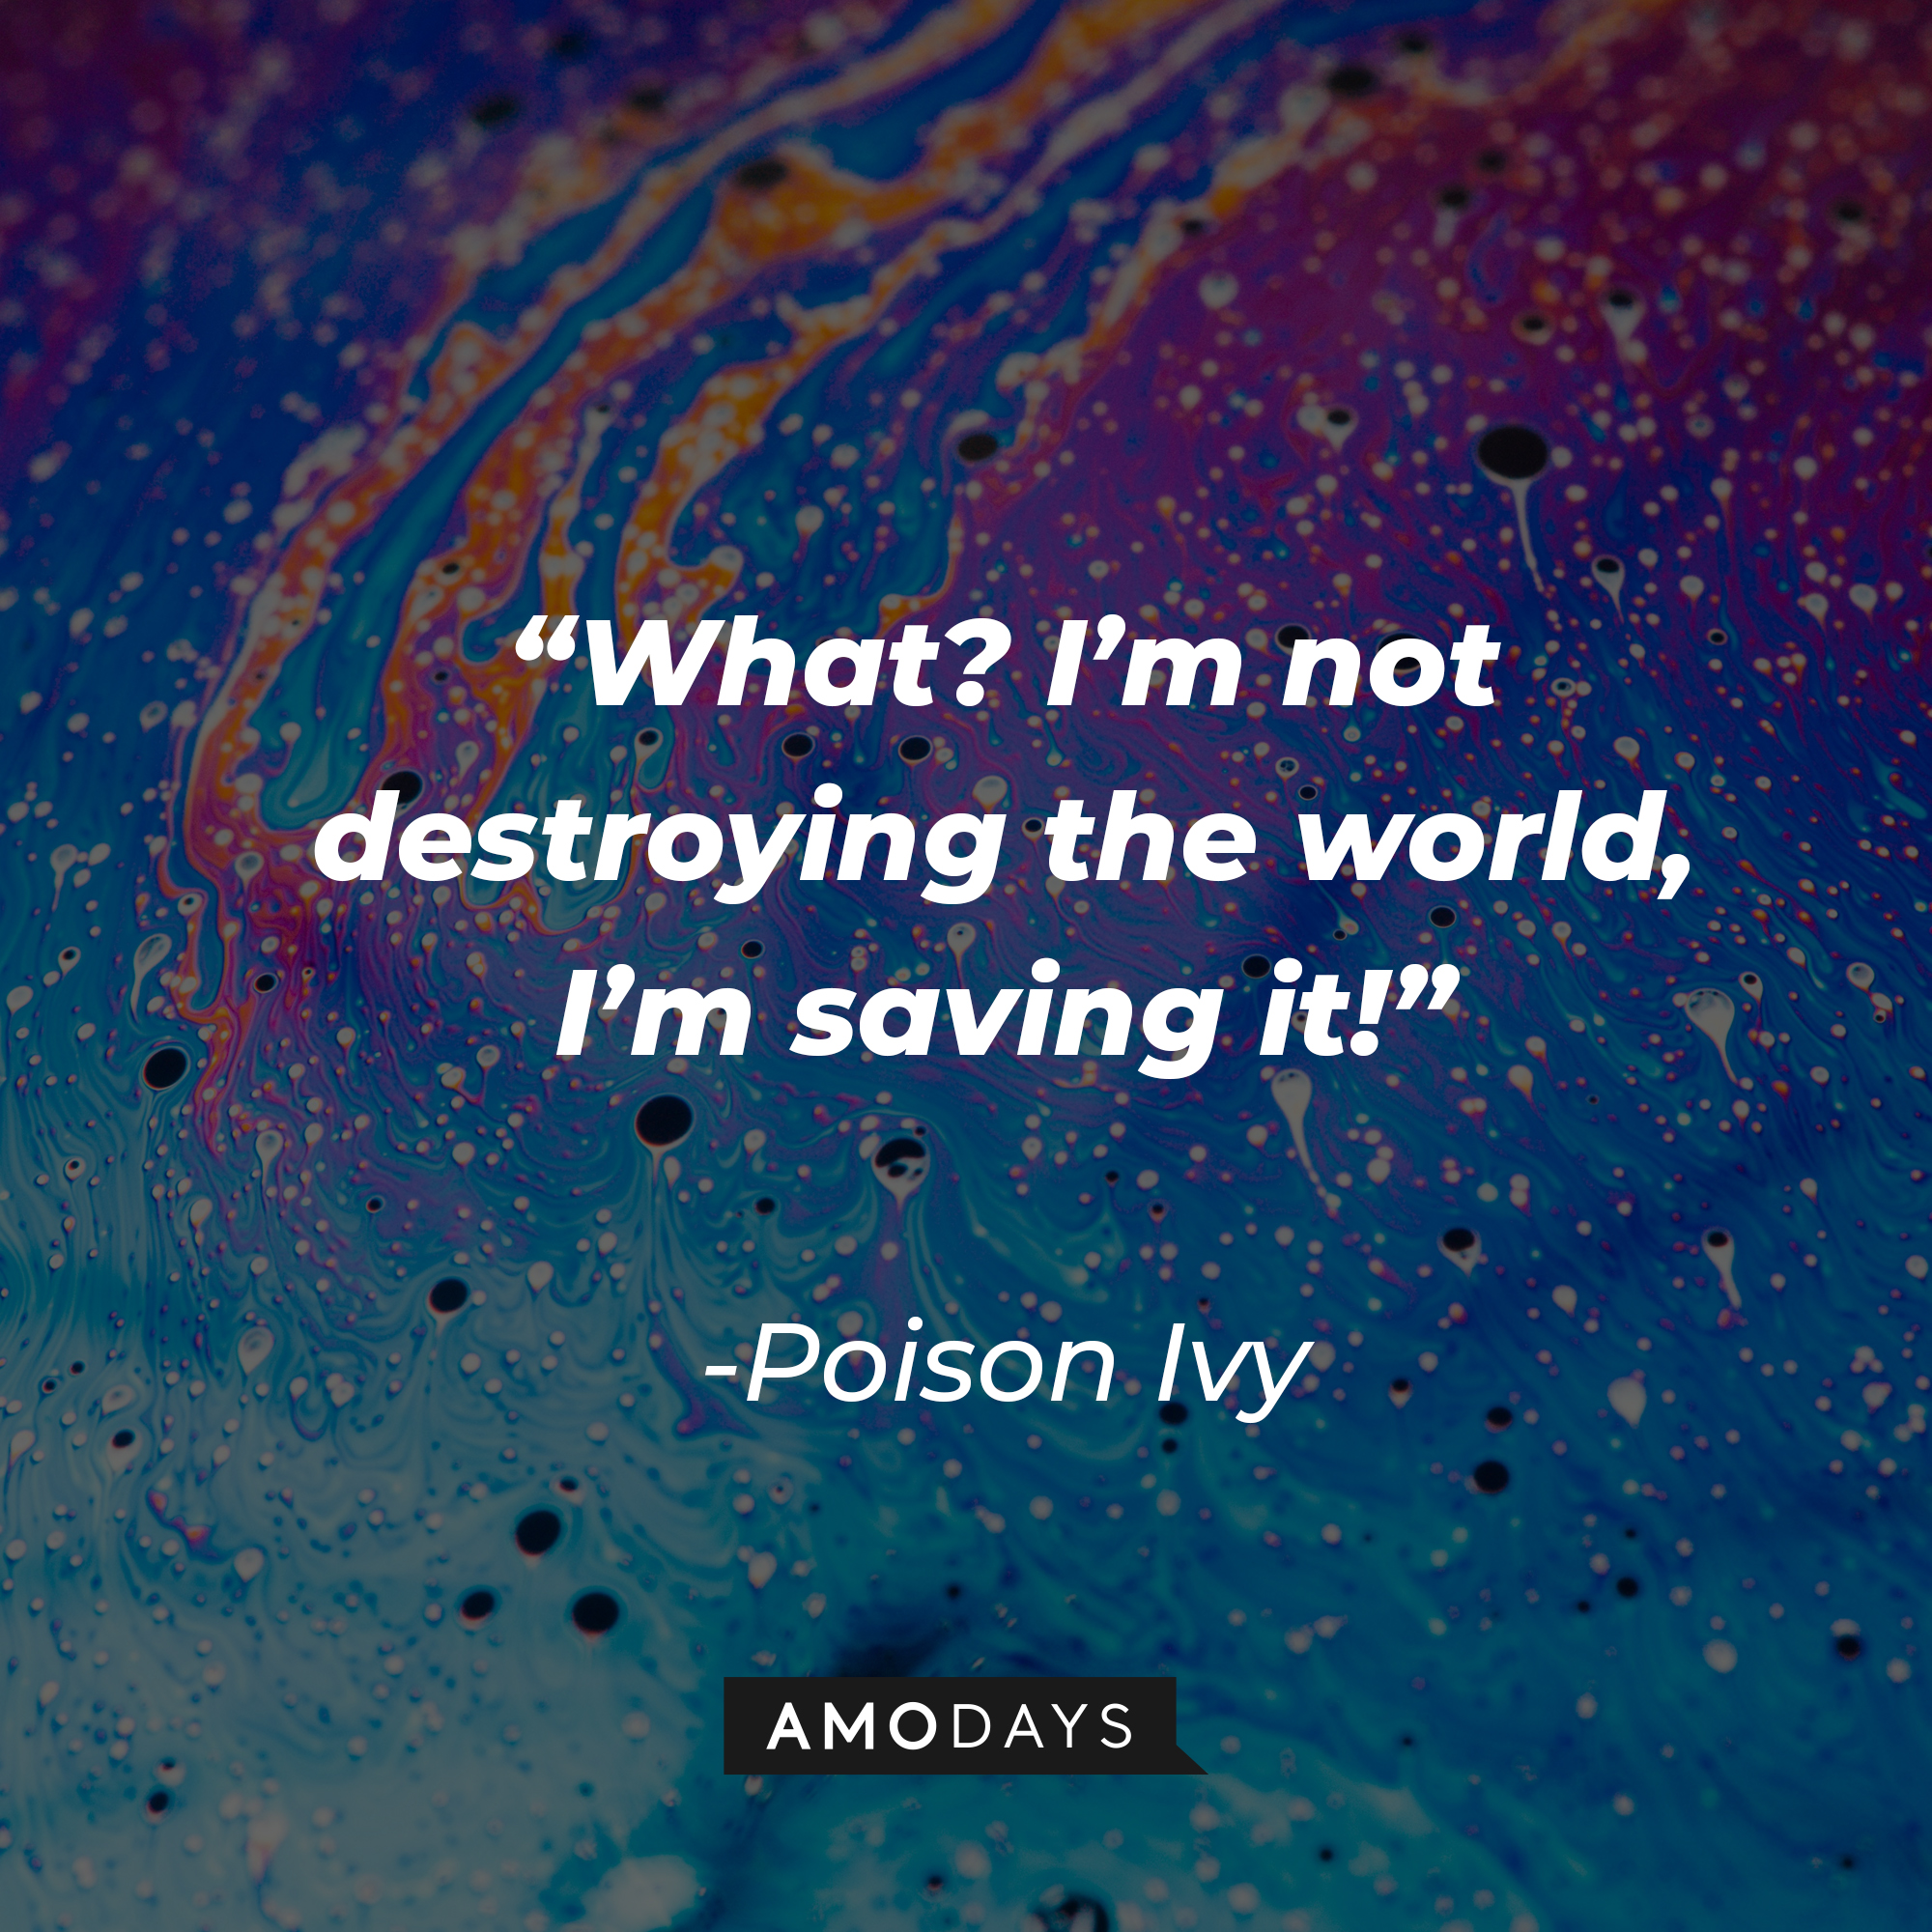 Poison Ivy’s quote: “What? I’m not destroying the world, I’m saving it!” | Image: Unsplash